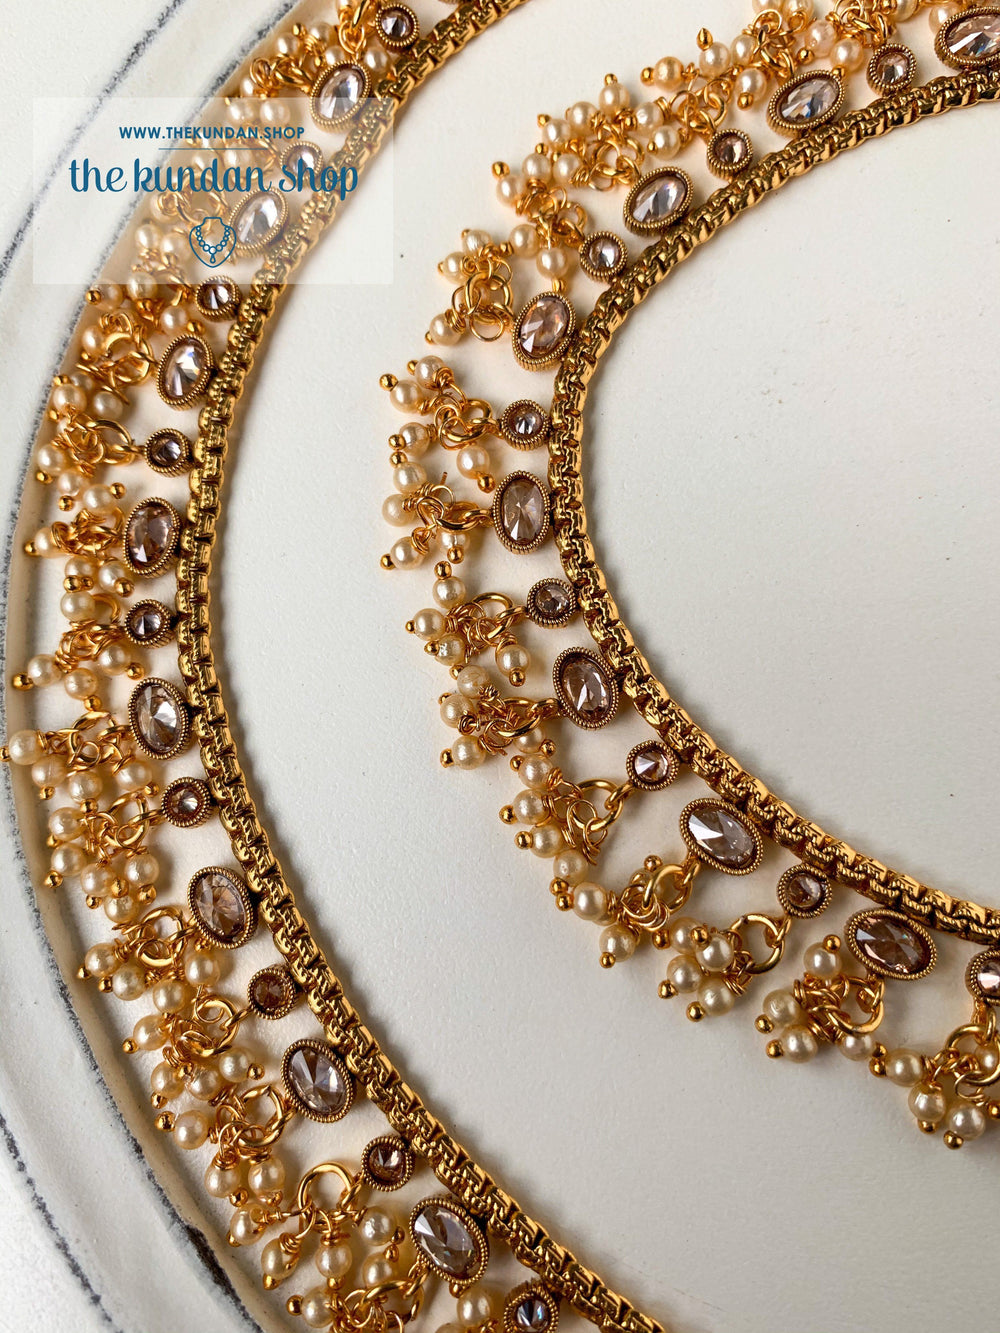 Shining Through in Bright Gold - Polki Anklets Anklets THE KUNDAN SHOP 